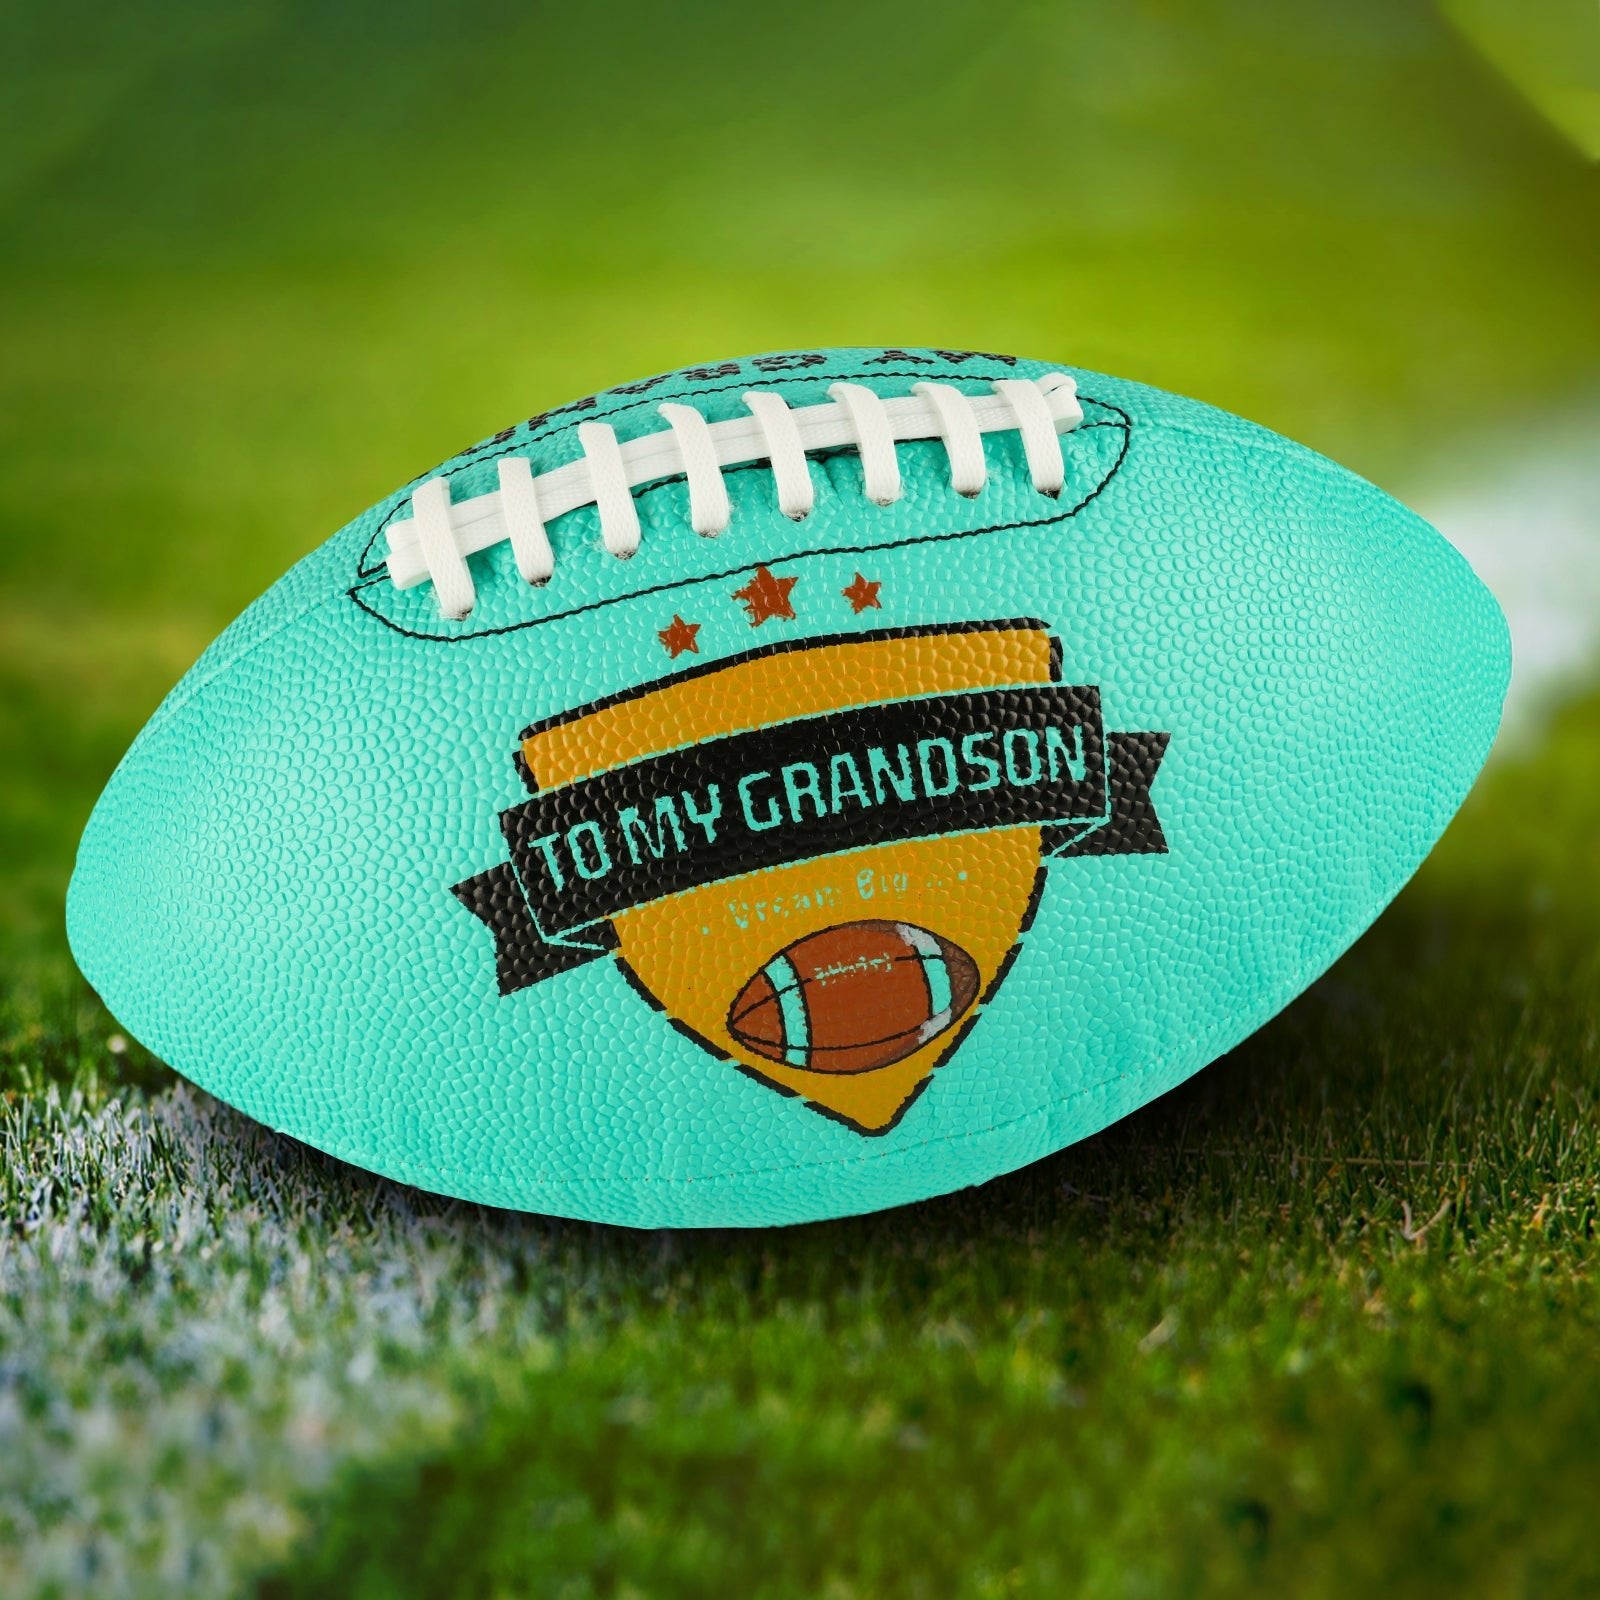 To My Grandson - Personalized Football Birthday Graduation Christmas Holiday Gift, Blue - Family Watchs